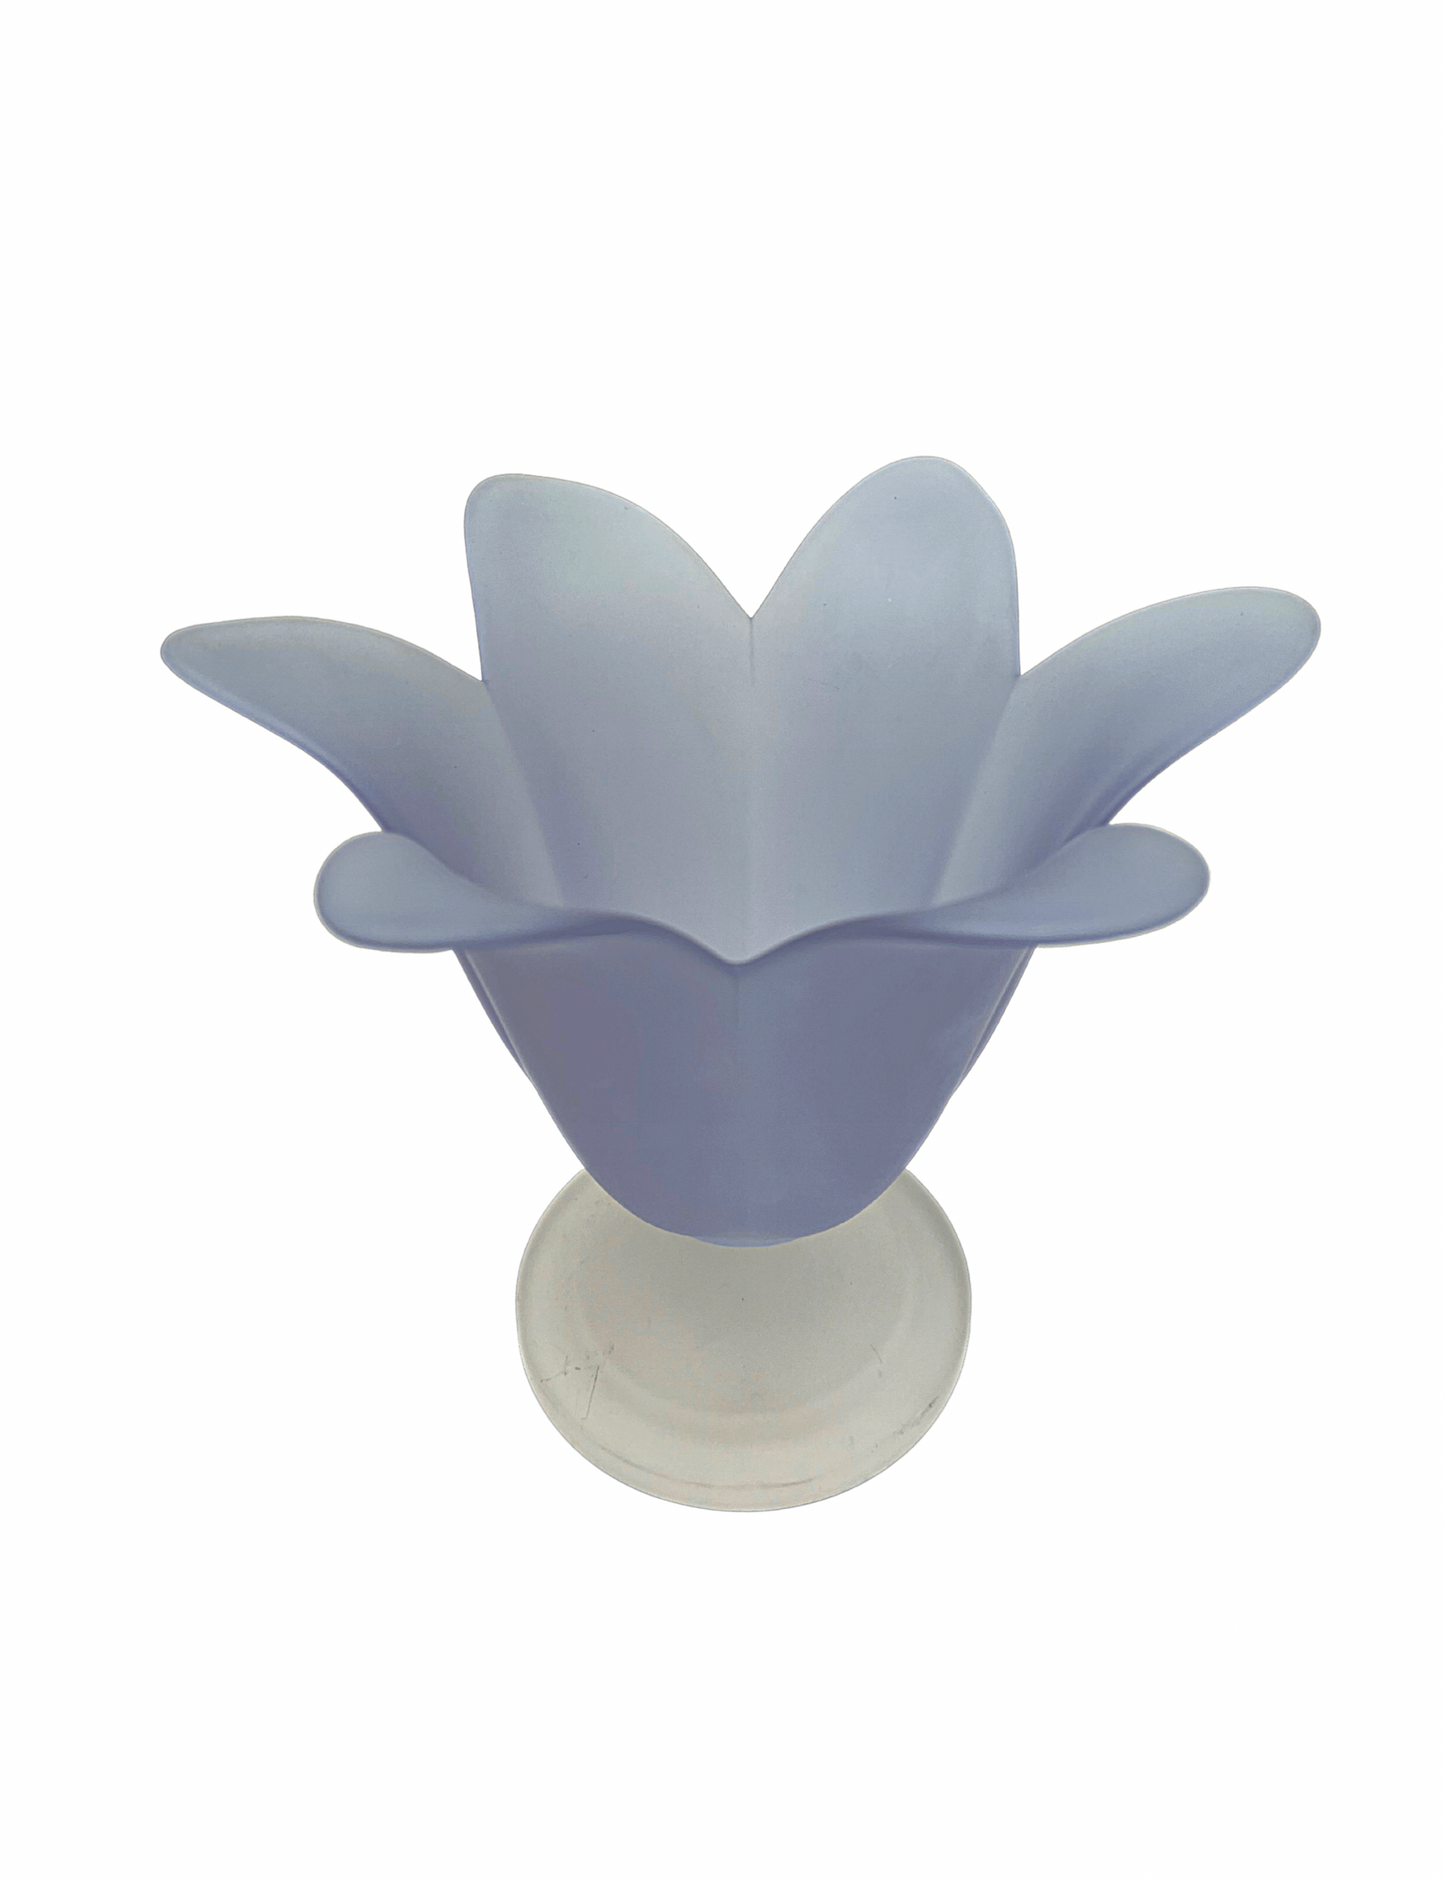 80’s Tulip Frosted Glass Partylite 7” Candle Holder